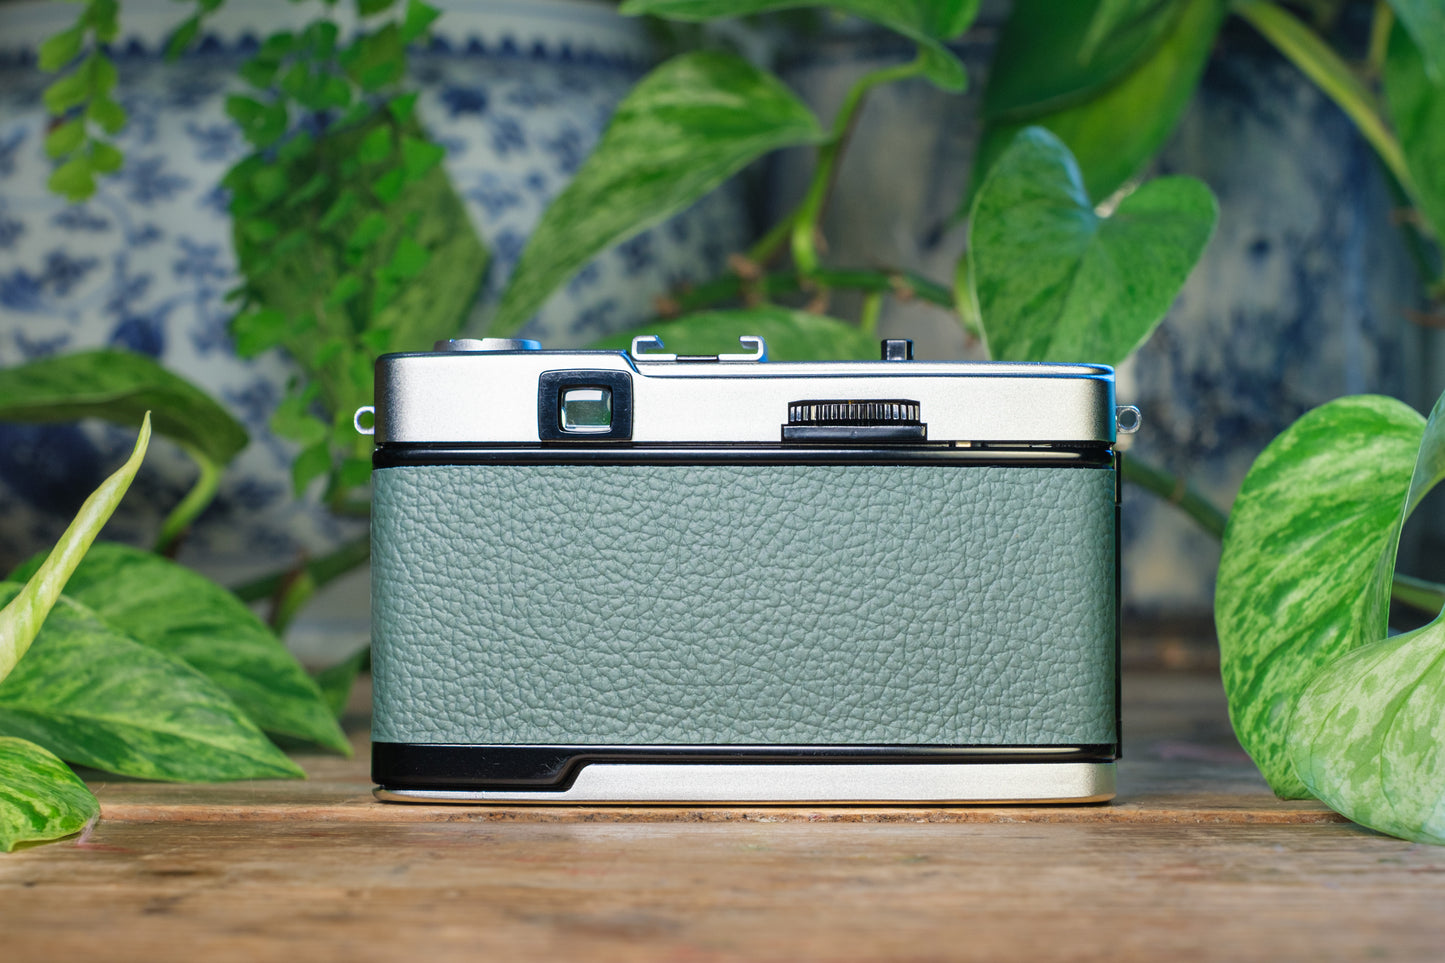 Olympus Trip 35 Vintage 35mm Film Camera - Forest Slate Green | Tested & Fully Refurbished | 100 Day Guarantee